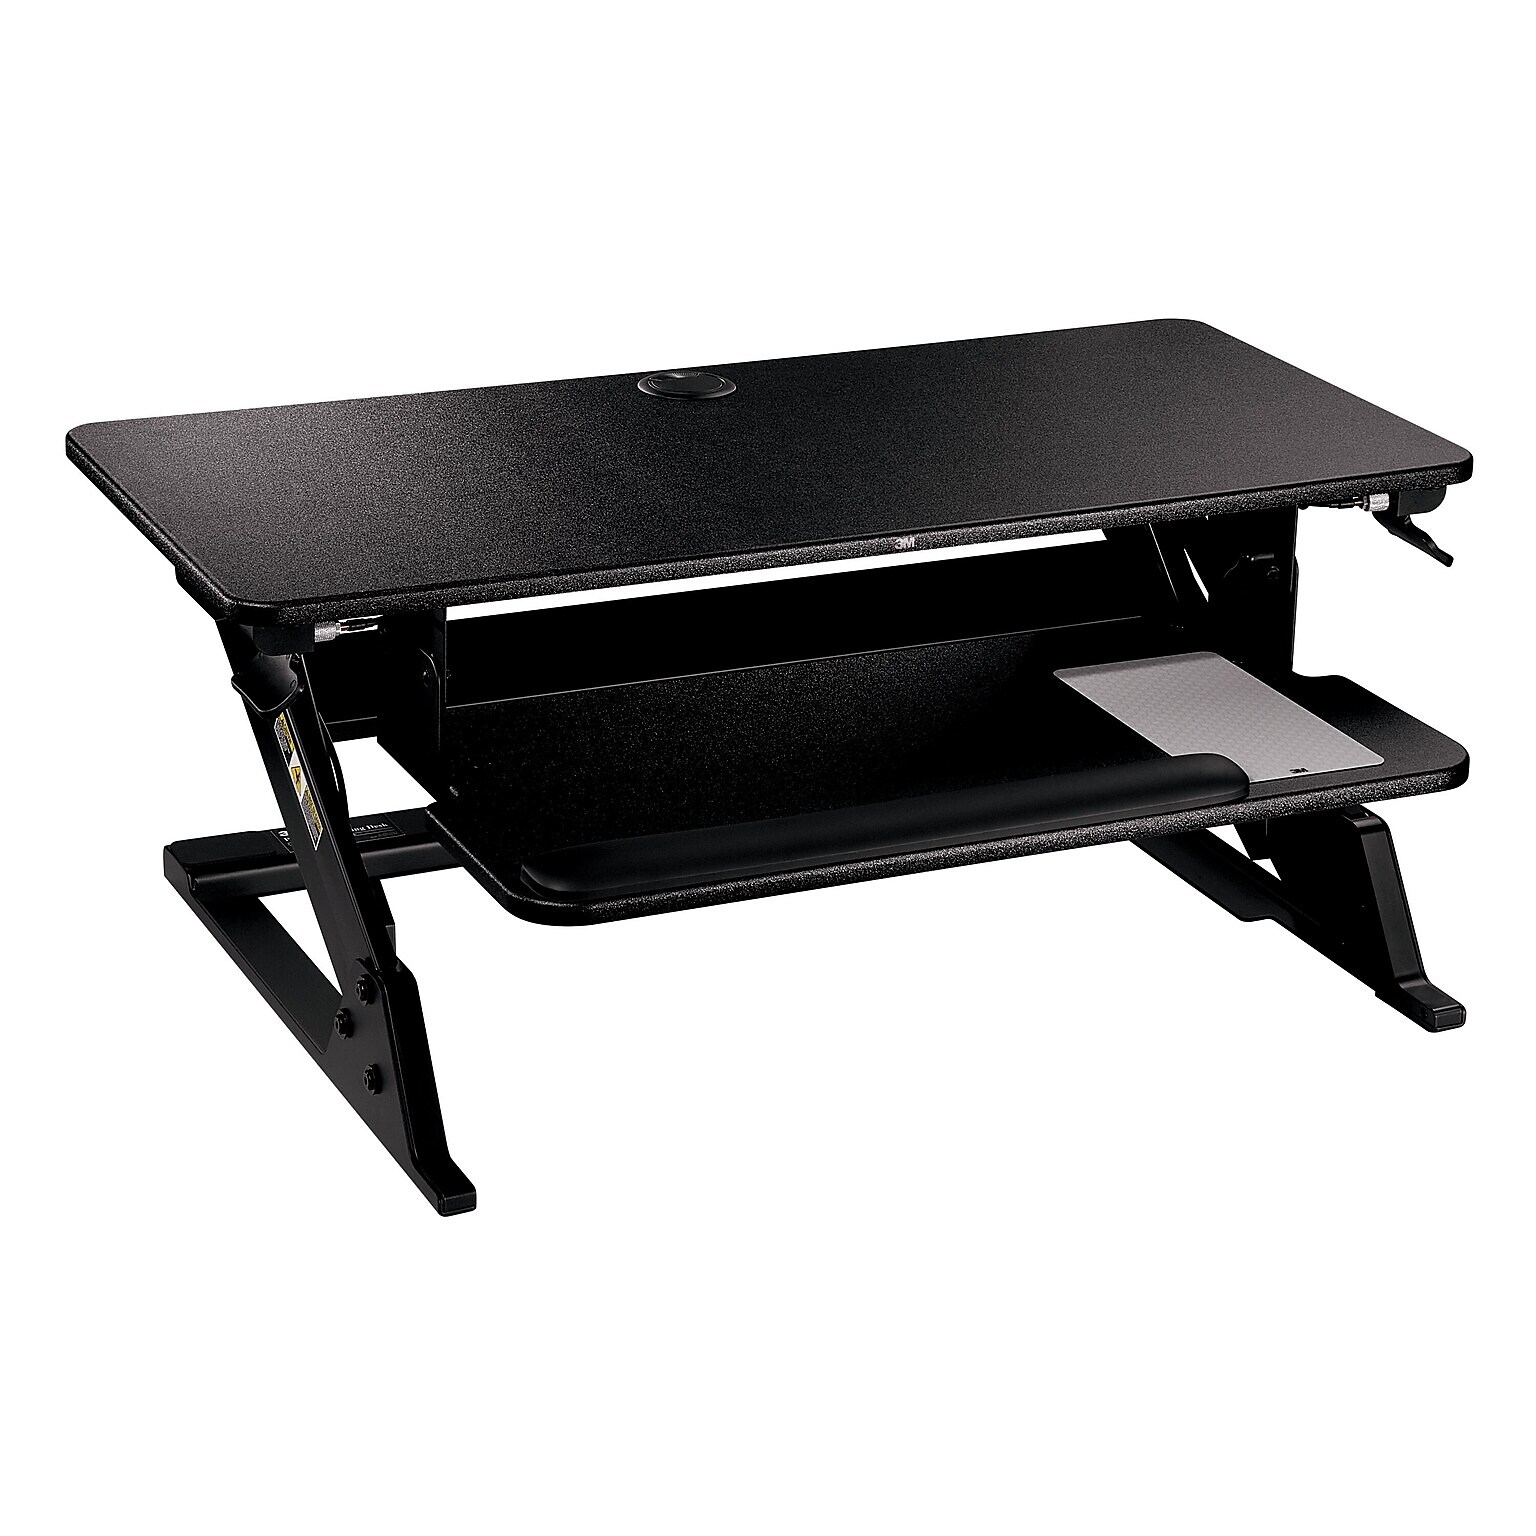 3M™ Precision Standing Desk 35W Manual Adjustable Desk Riser with Gel Wrist Rest and Precise™ Mouse Pad, Black (SD60B7)